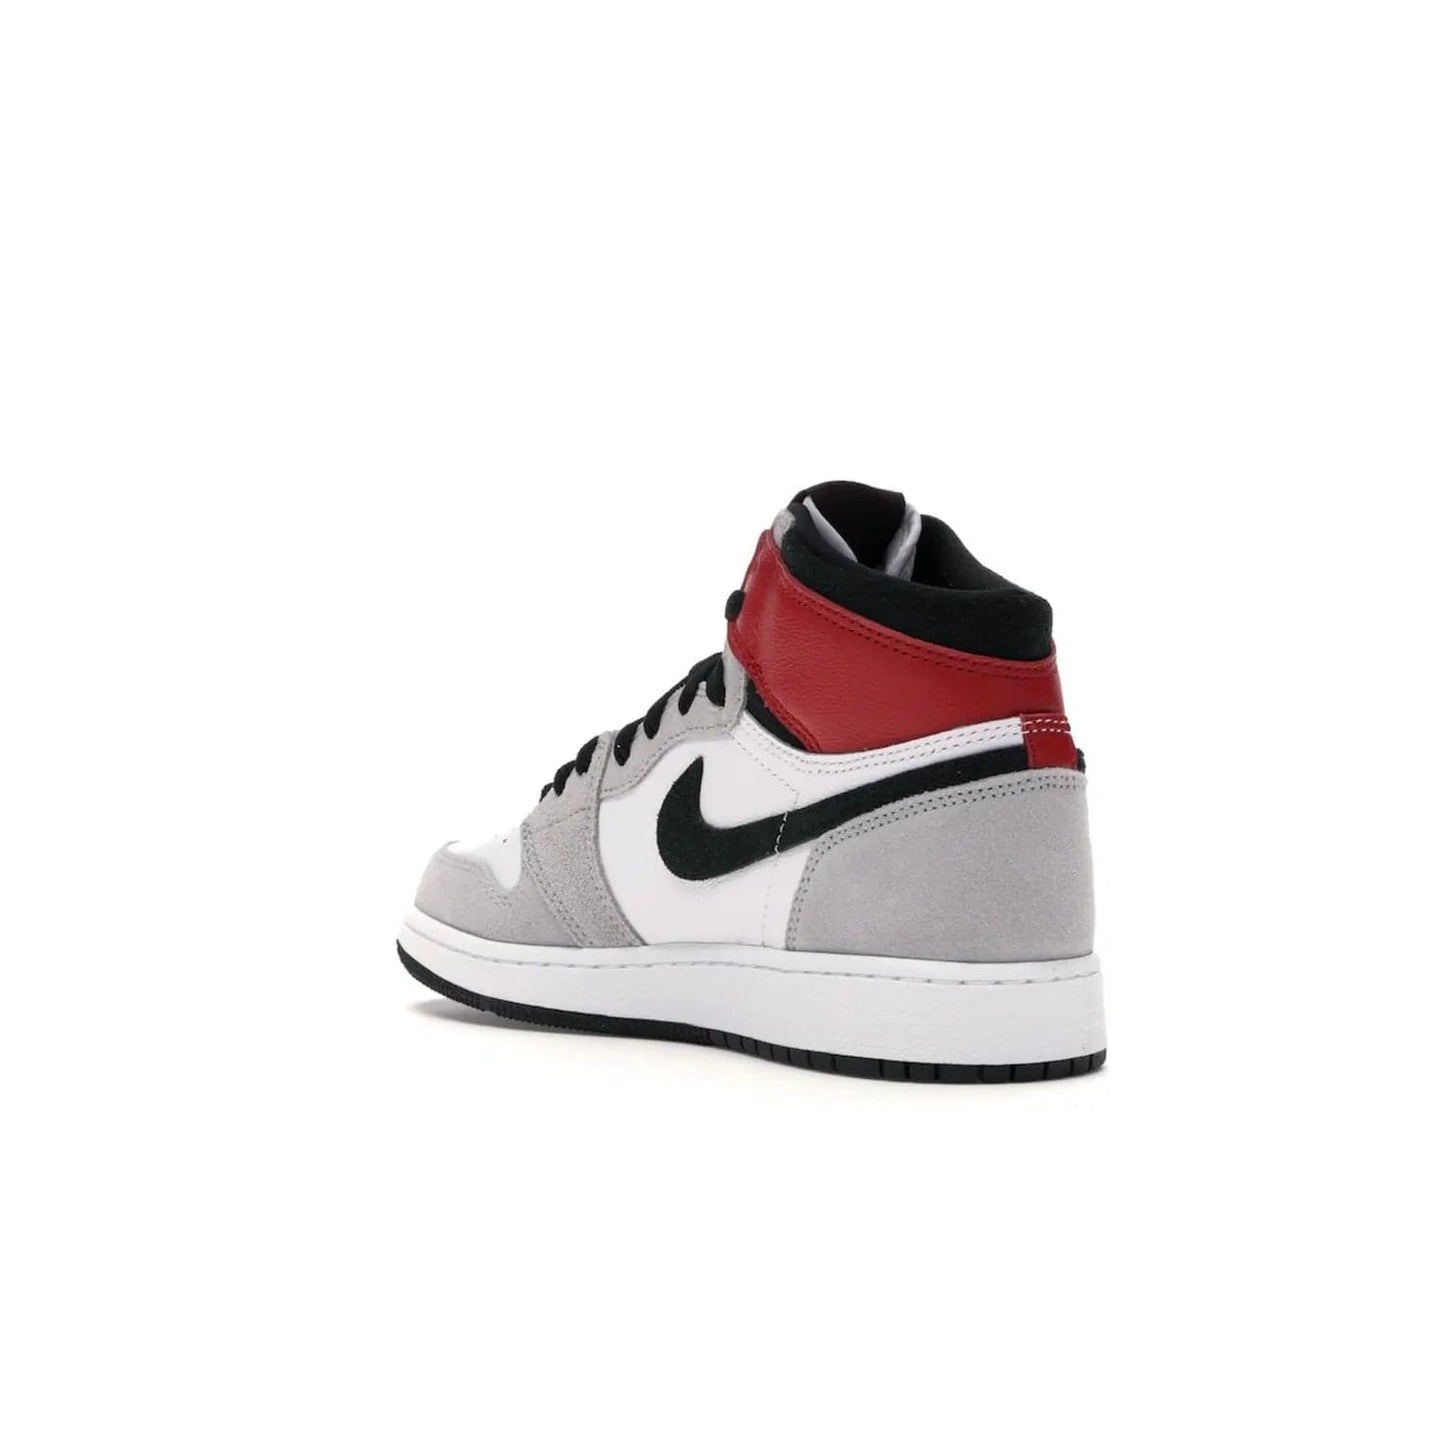 Jordan 1 Retro High Light Smoke Grey (GS) - Image 24 - Only at www.BallersClubKickz.com - Jordan 1 Retro High Light Smoke Grey (GS) features shades of grey, black, and Varsity Red with a bold silhouette. Premium white leather and suede overlays create a unique look. Released July 2020, offering style and performance. Perfect sneaker for any collector or fan.